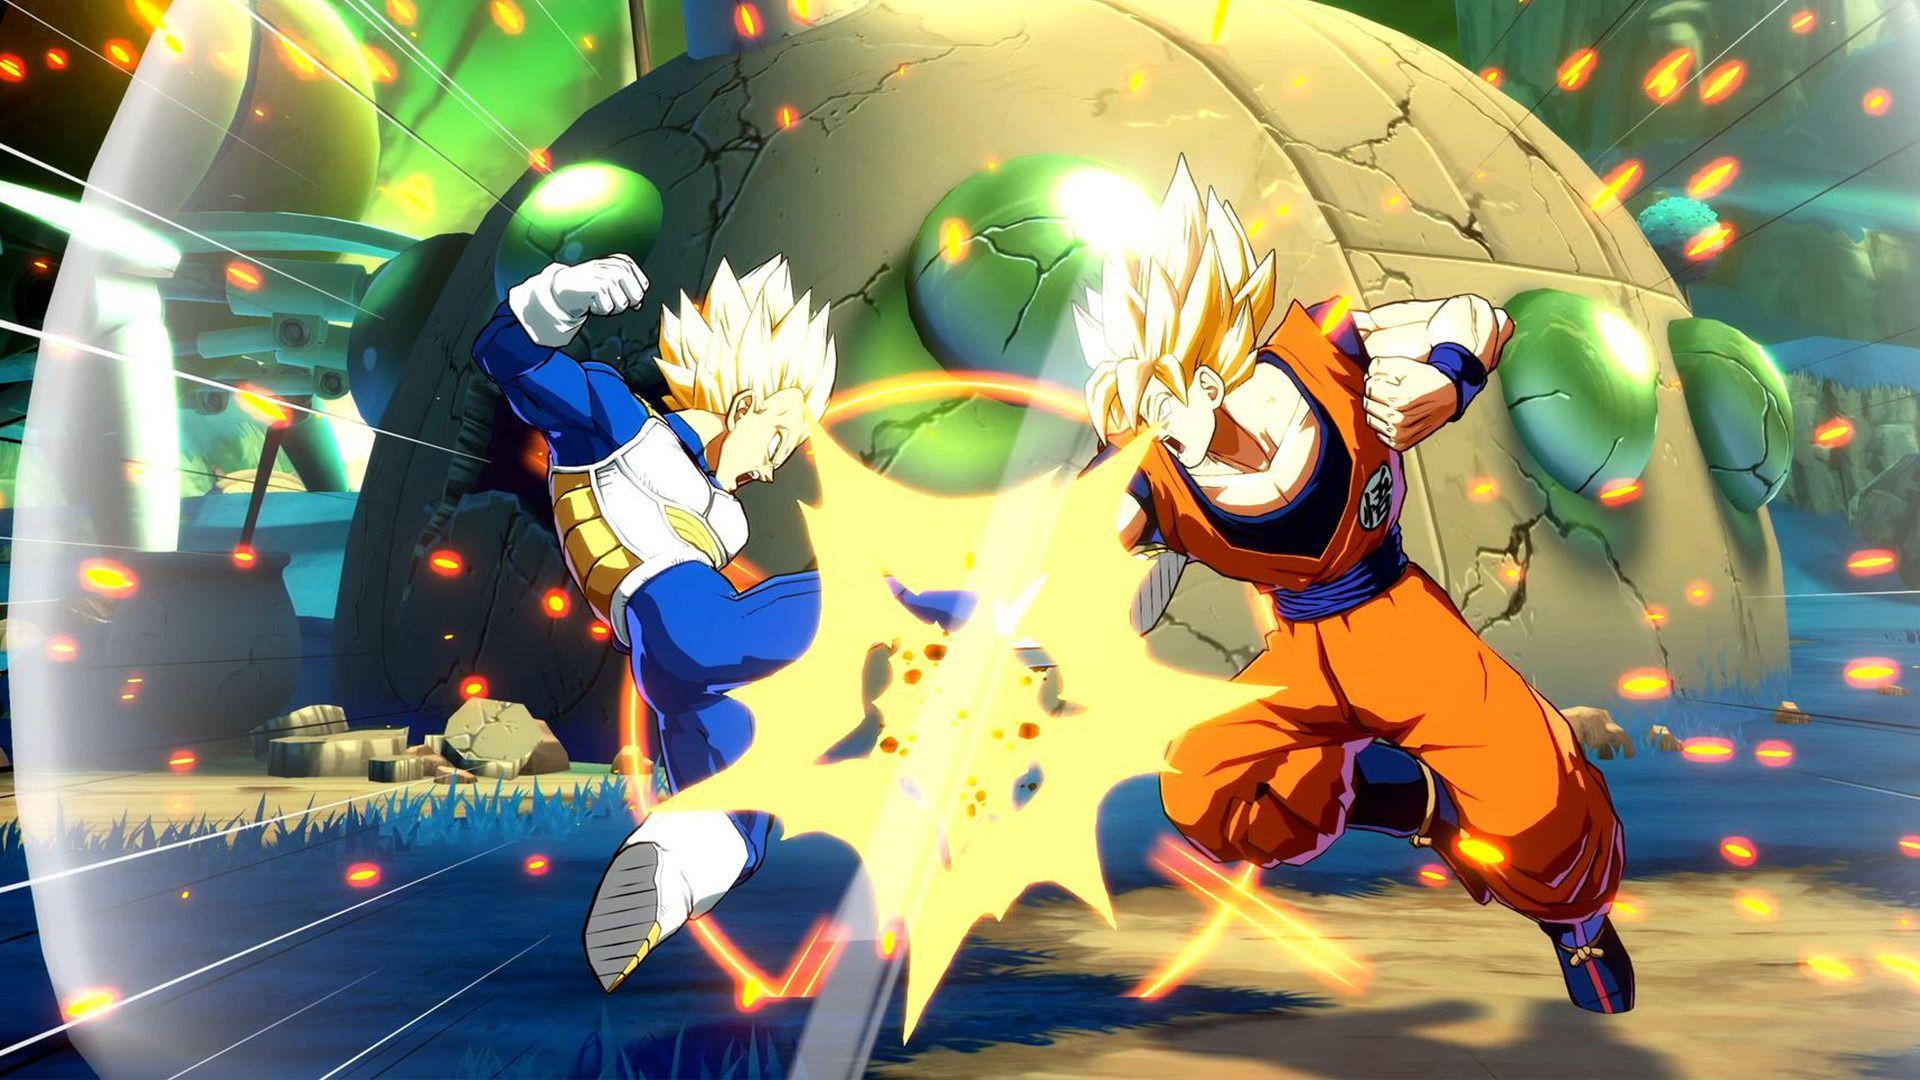 Yes, DRAGON BALL FIGHTERZ Will Have An English Dub